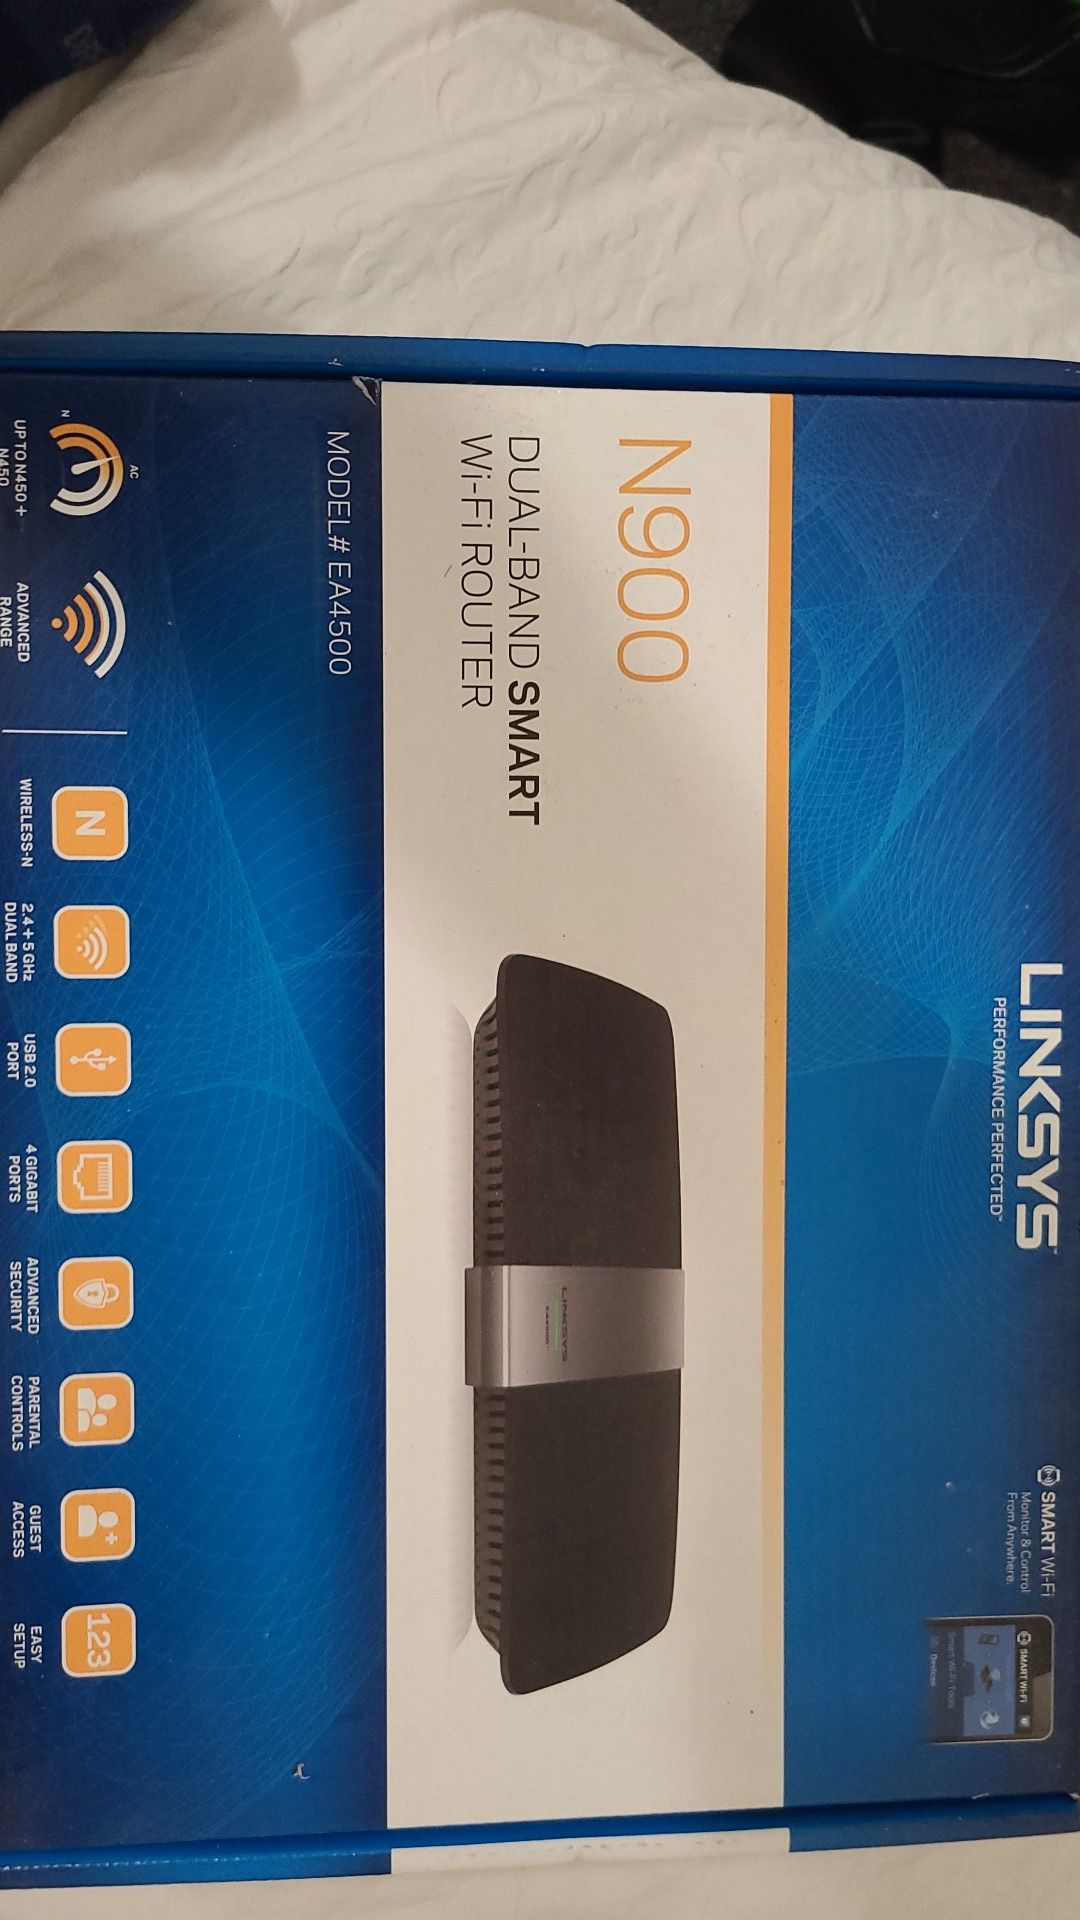 Linksys Ea4500 dual band smart wifi router